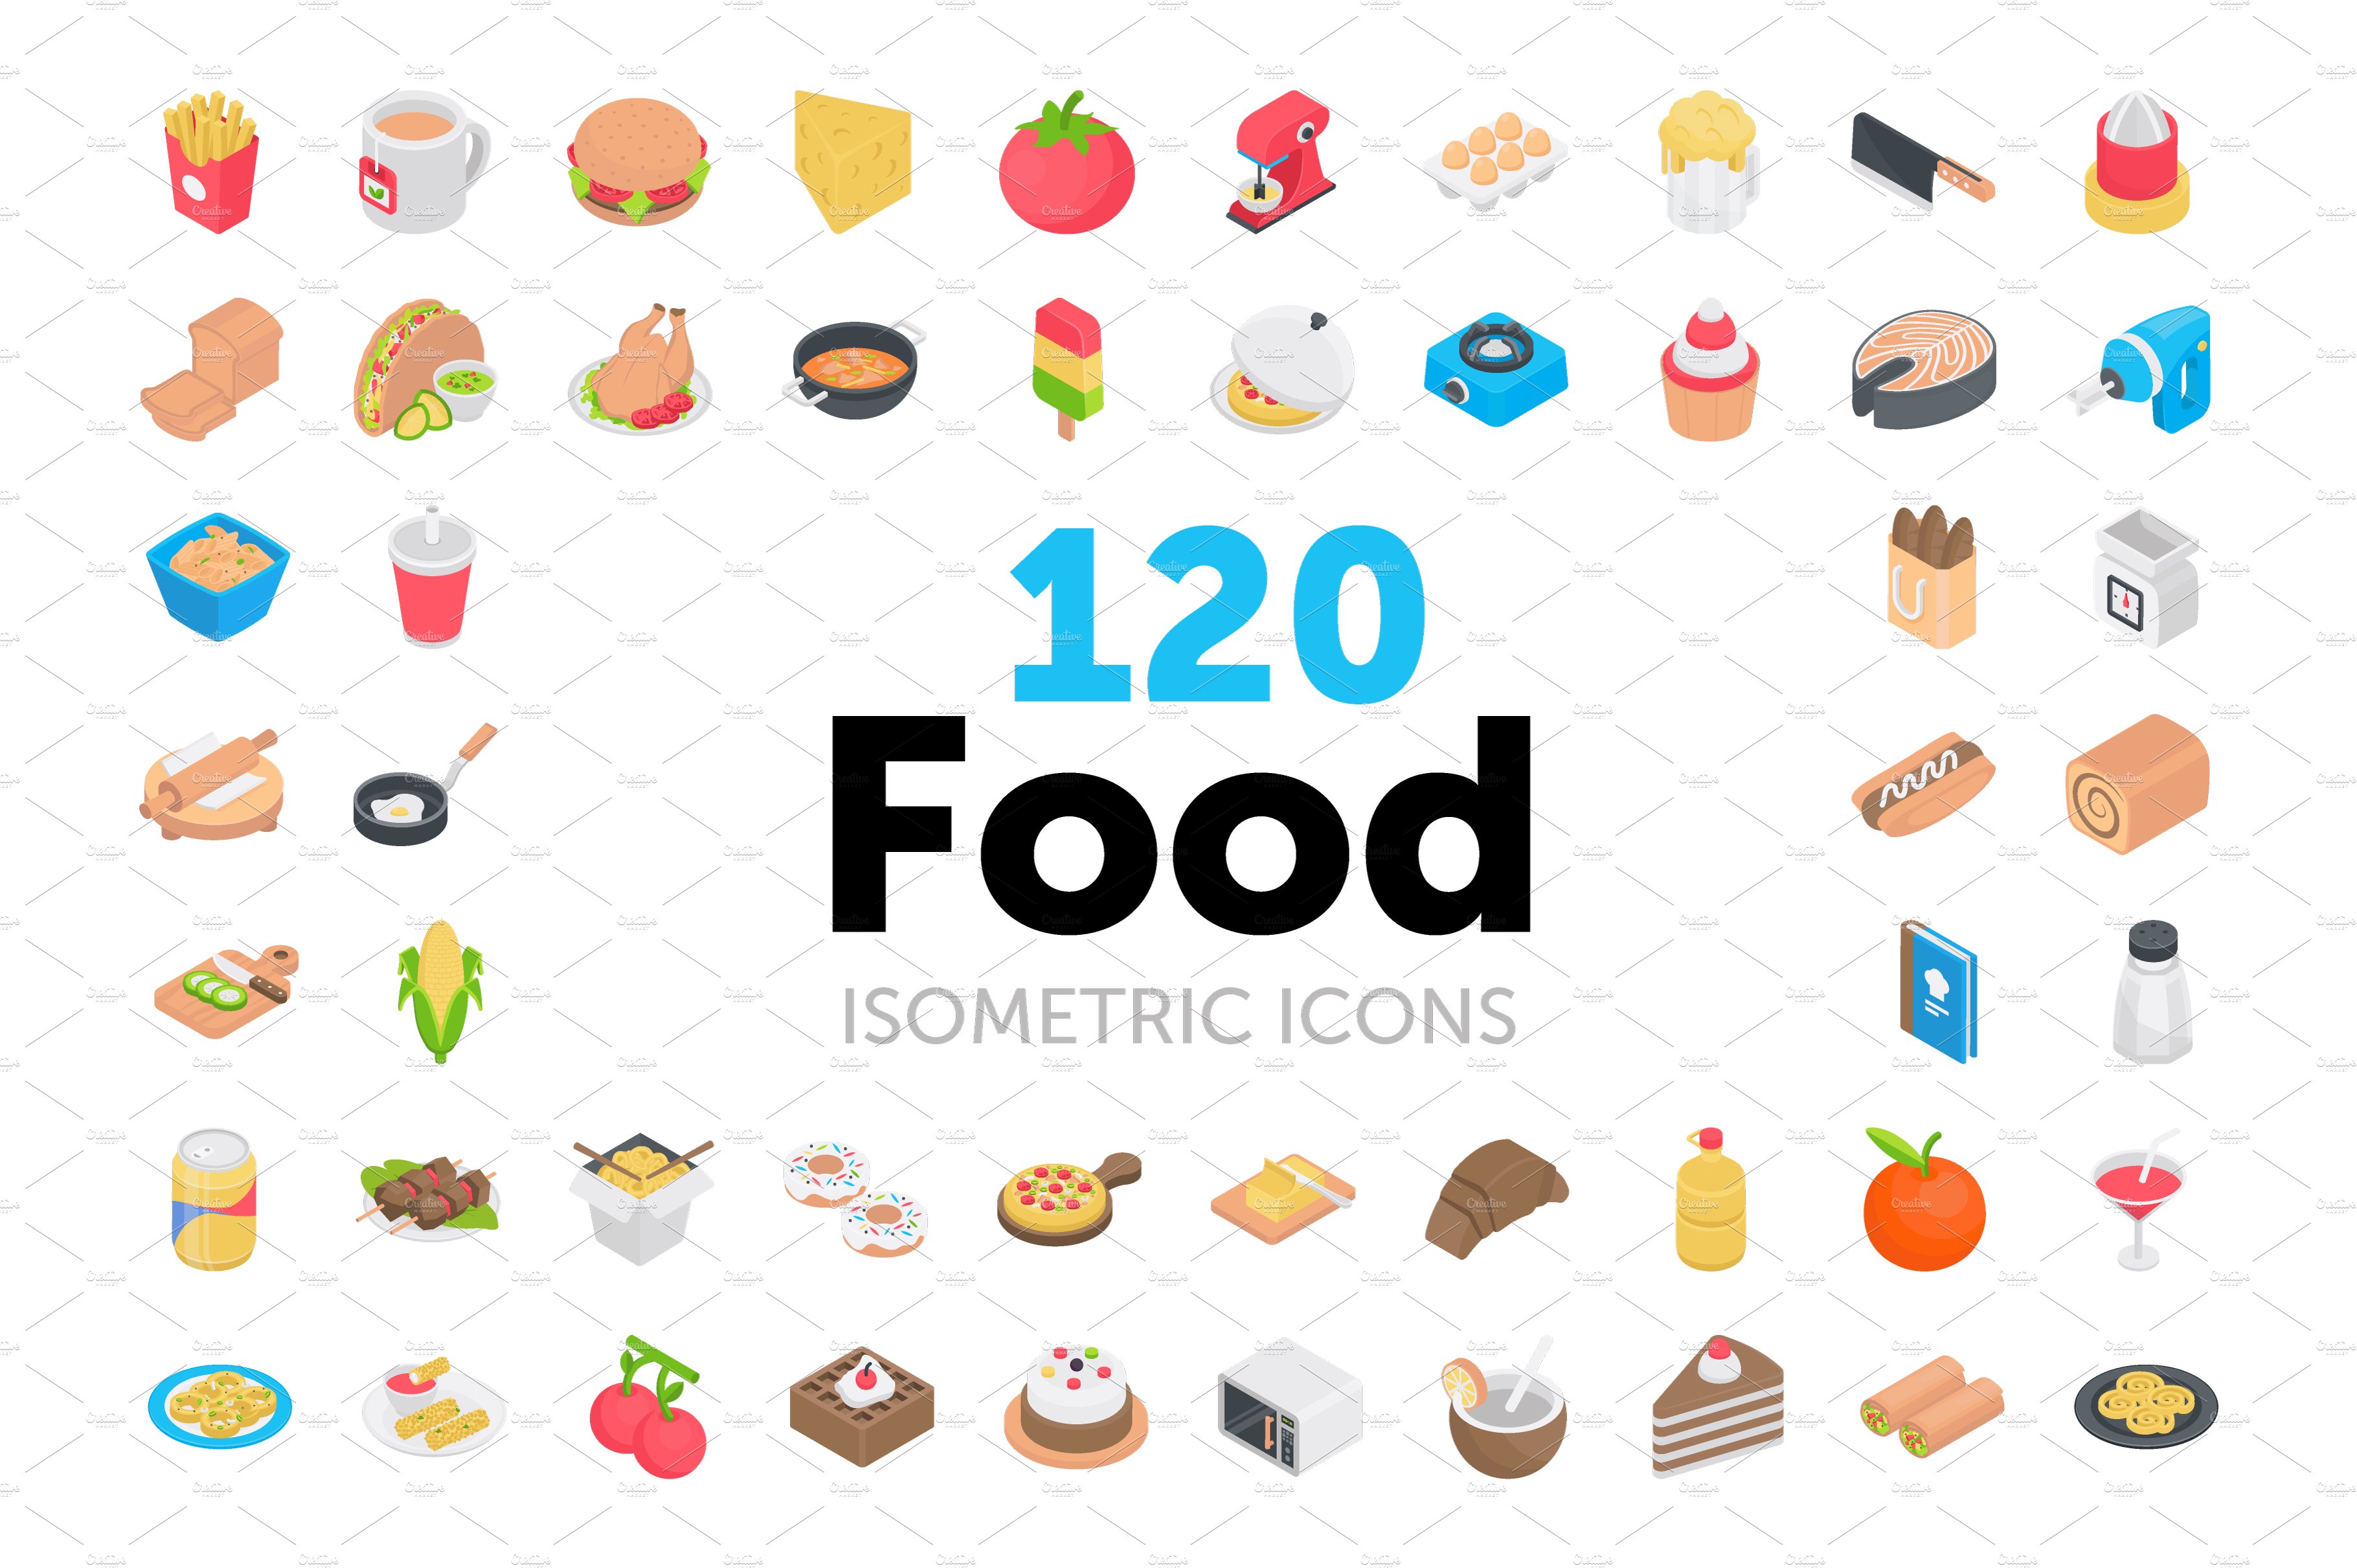 120 Food Isometric Icons cover image.